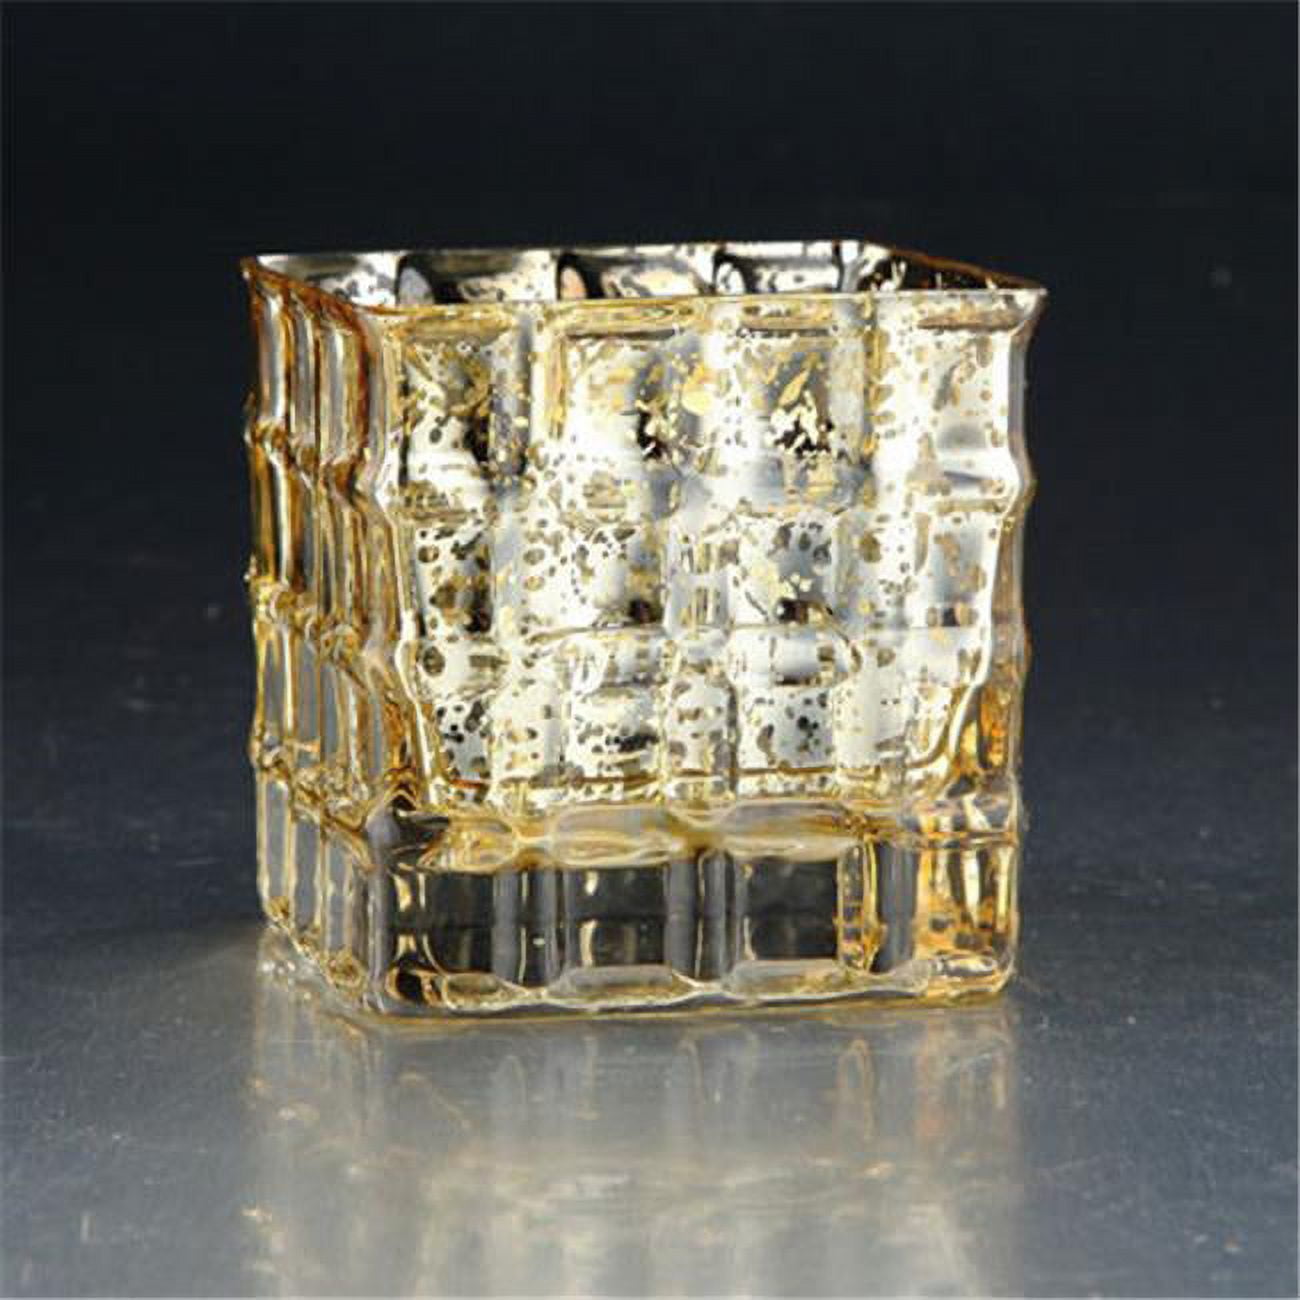 Friends are Forever 4 x 4 x 4 in. Square Glass Candle Holder, Gold